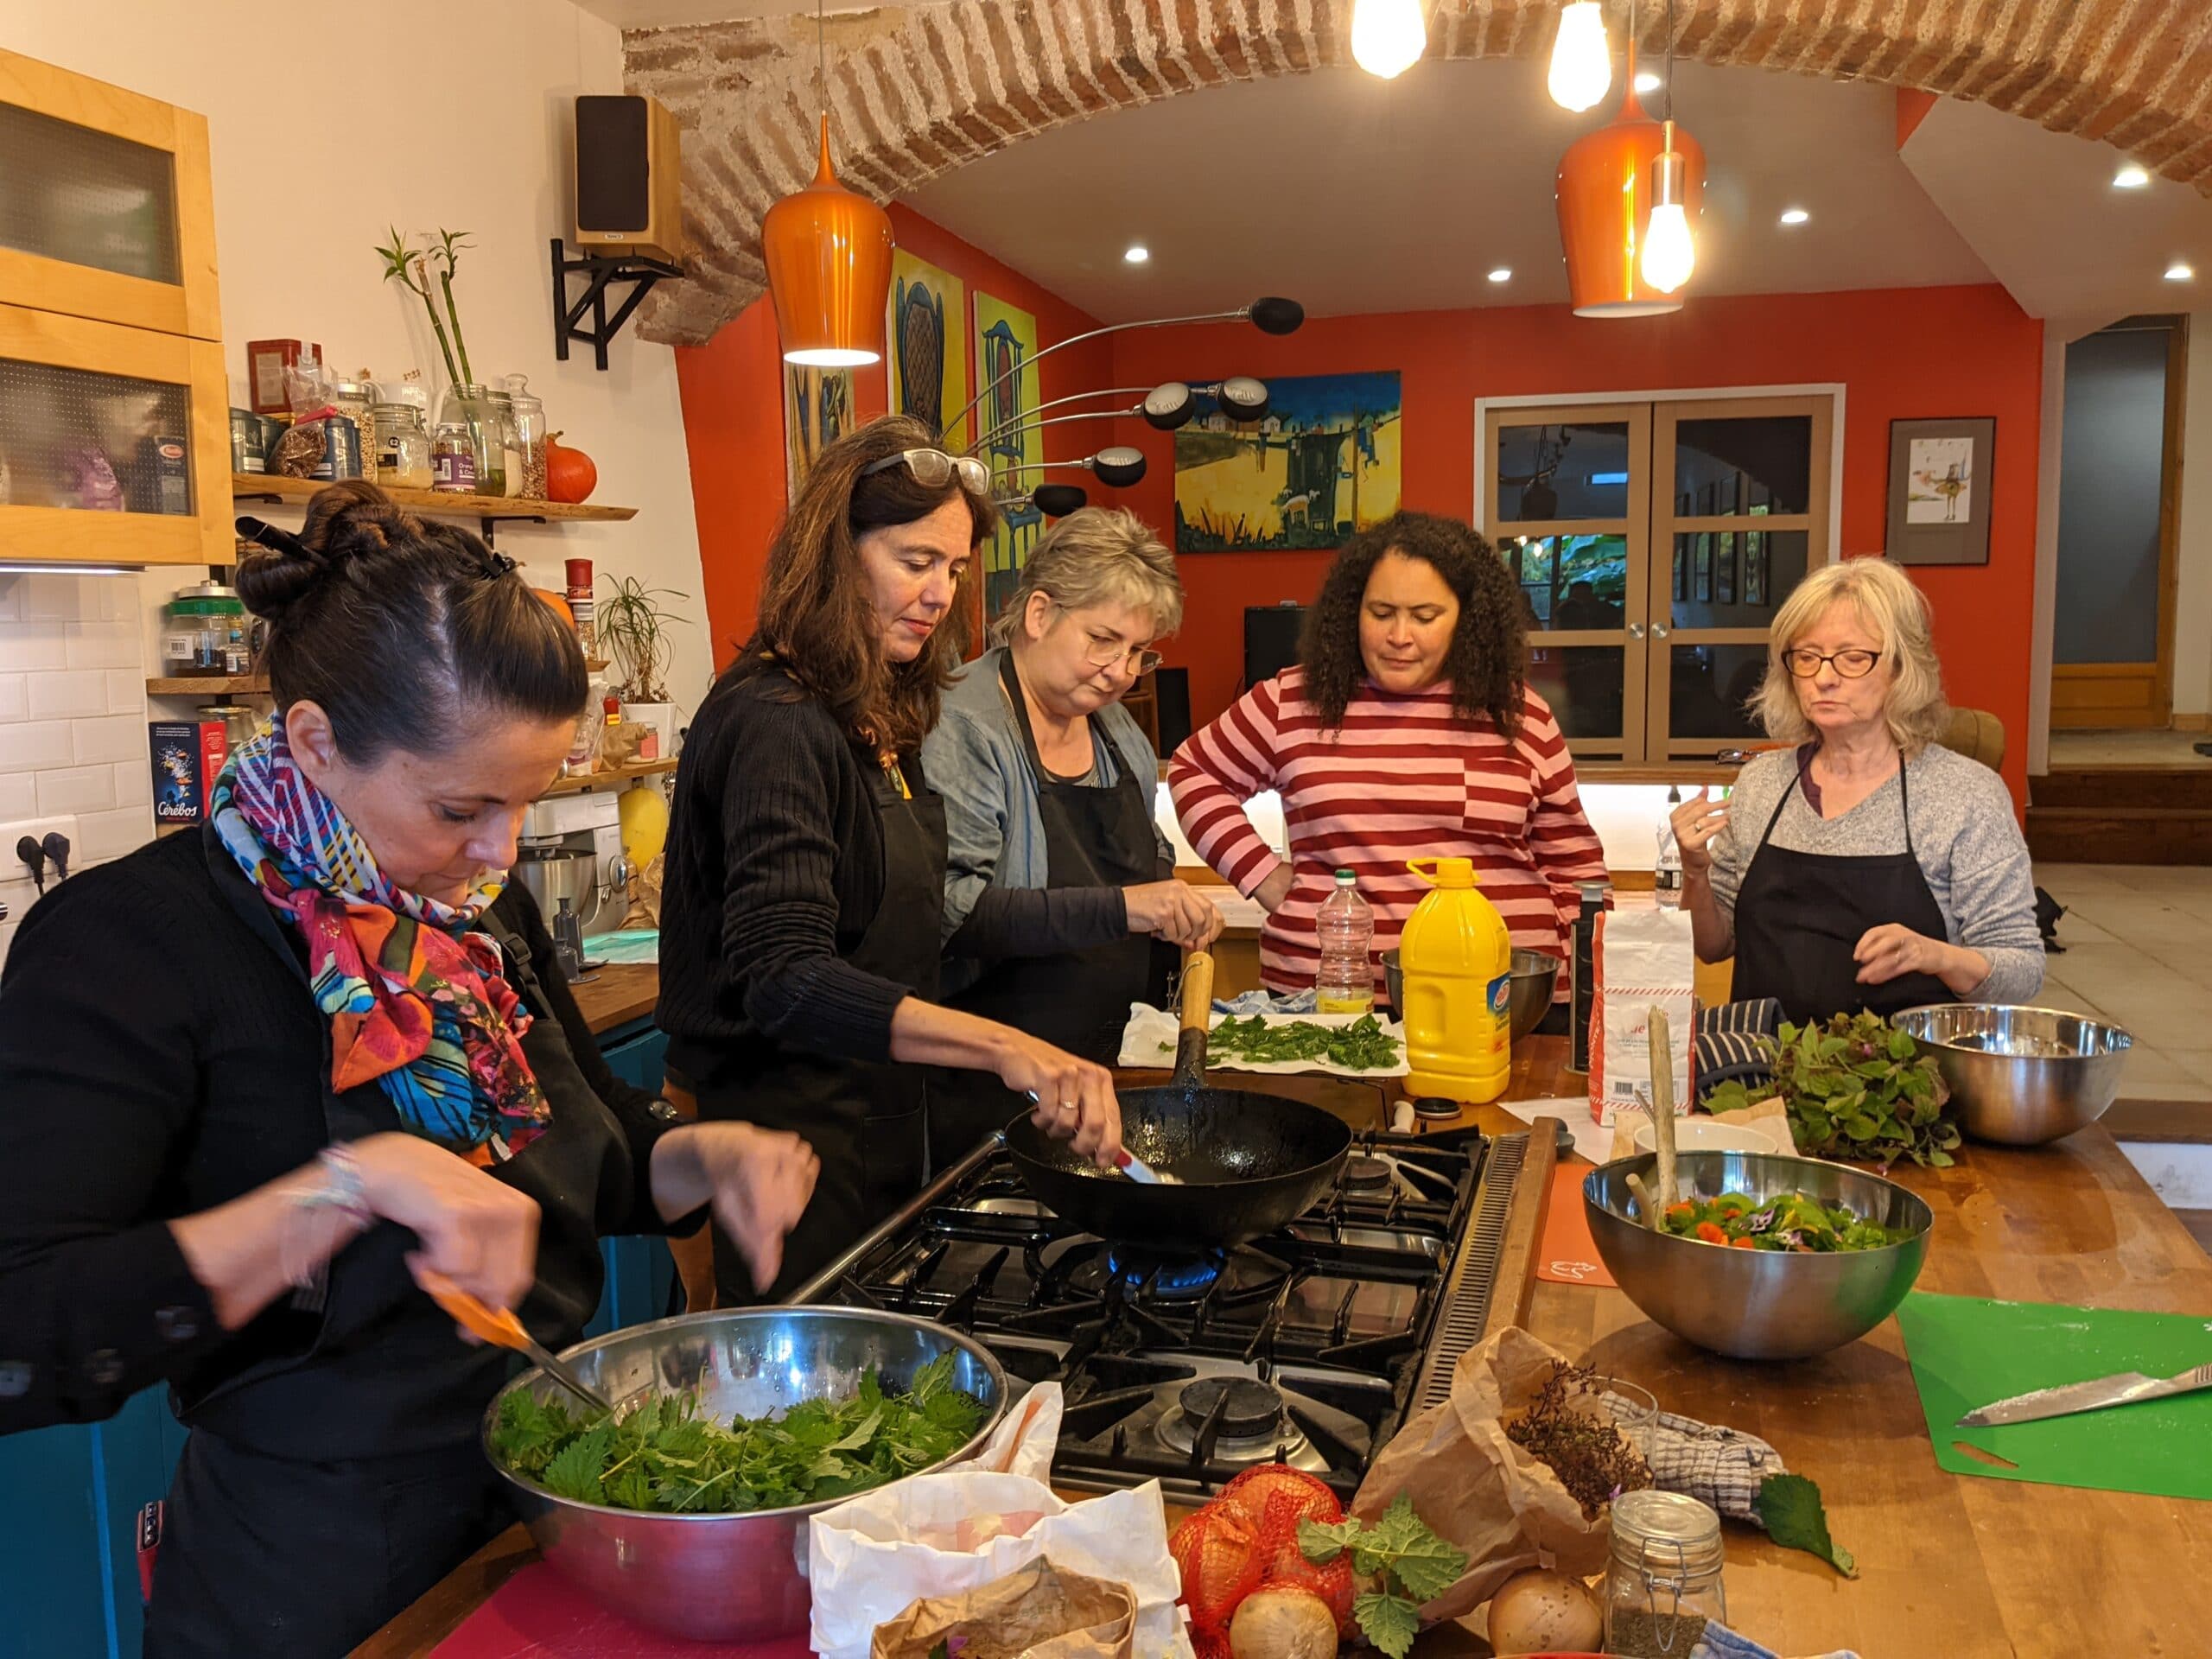 A group of people in a French country kitchen cooking together